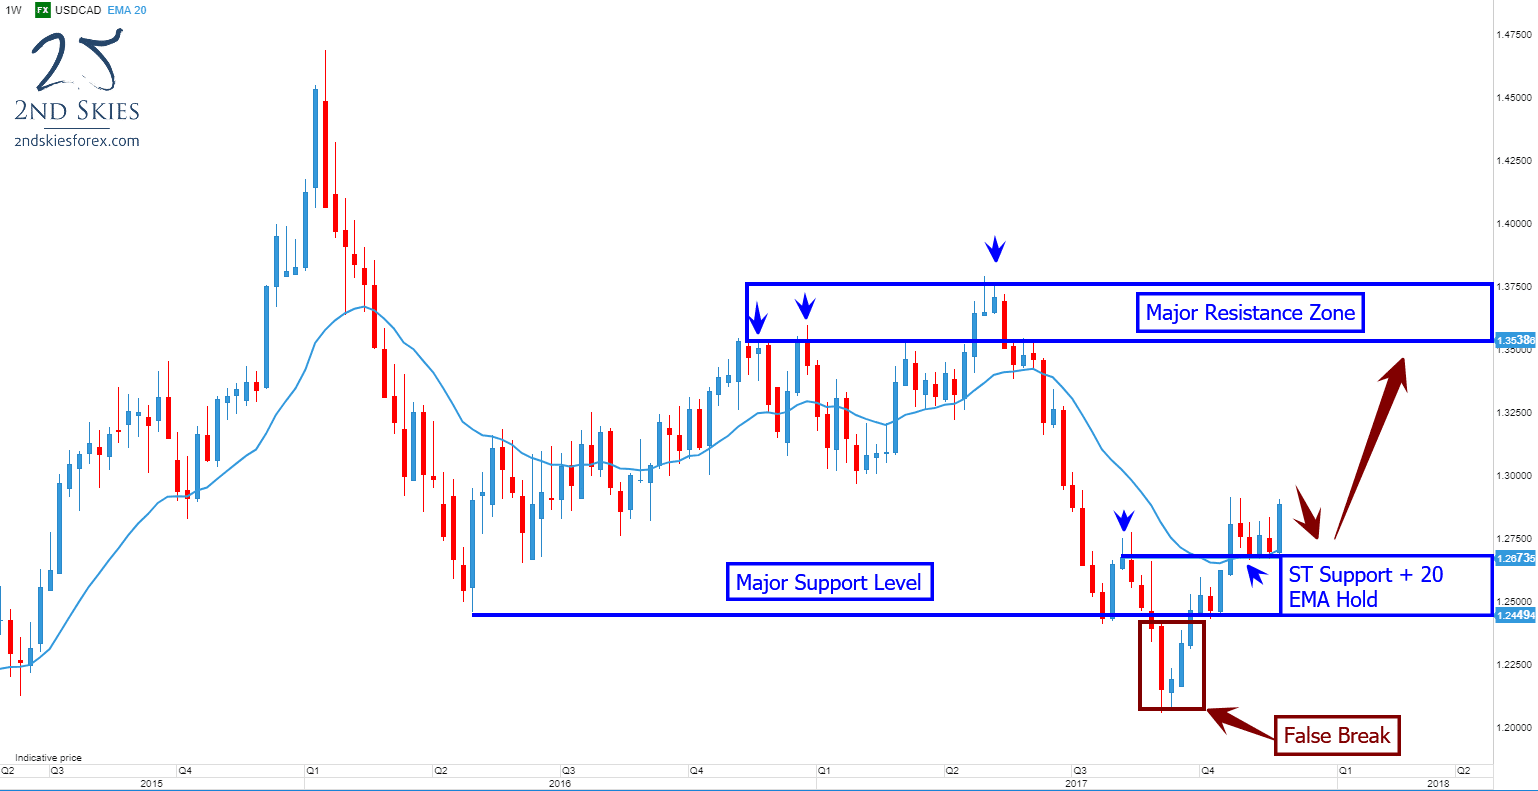 USDCAD trade ideas and price action context 2ndskiesforex